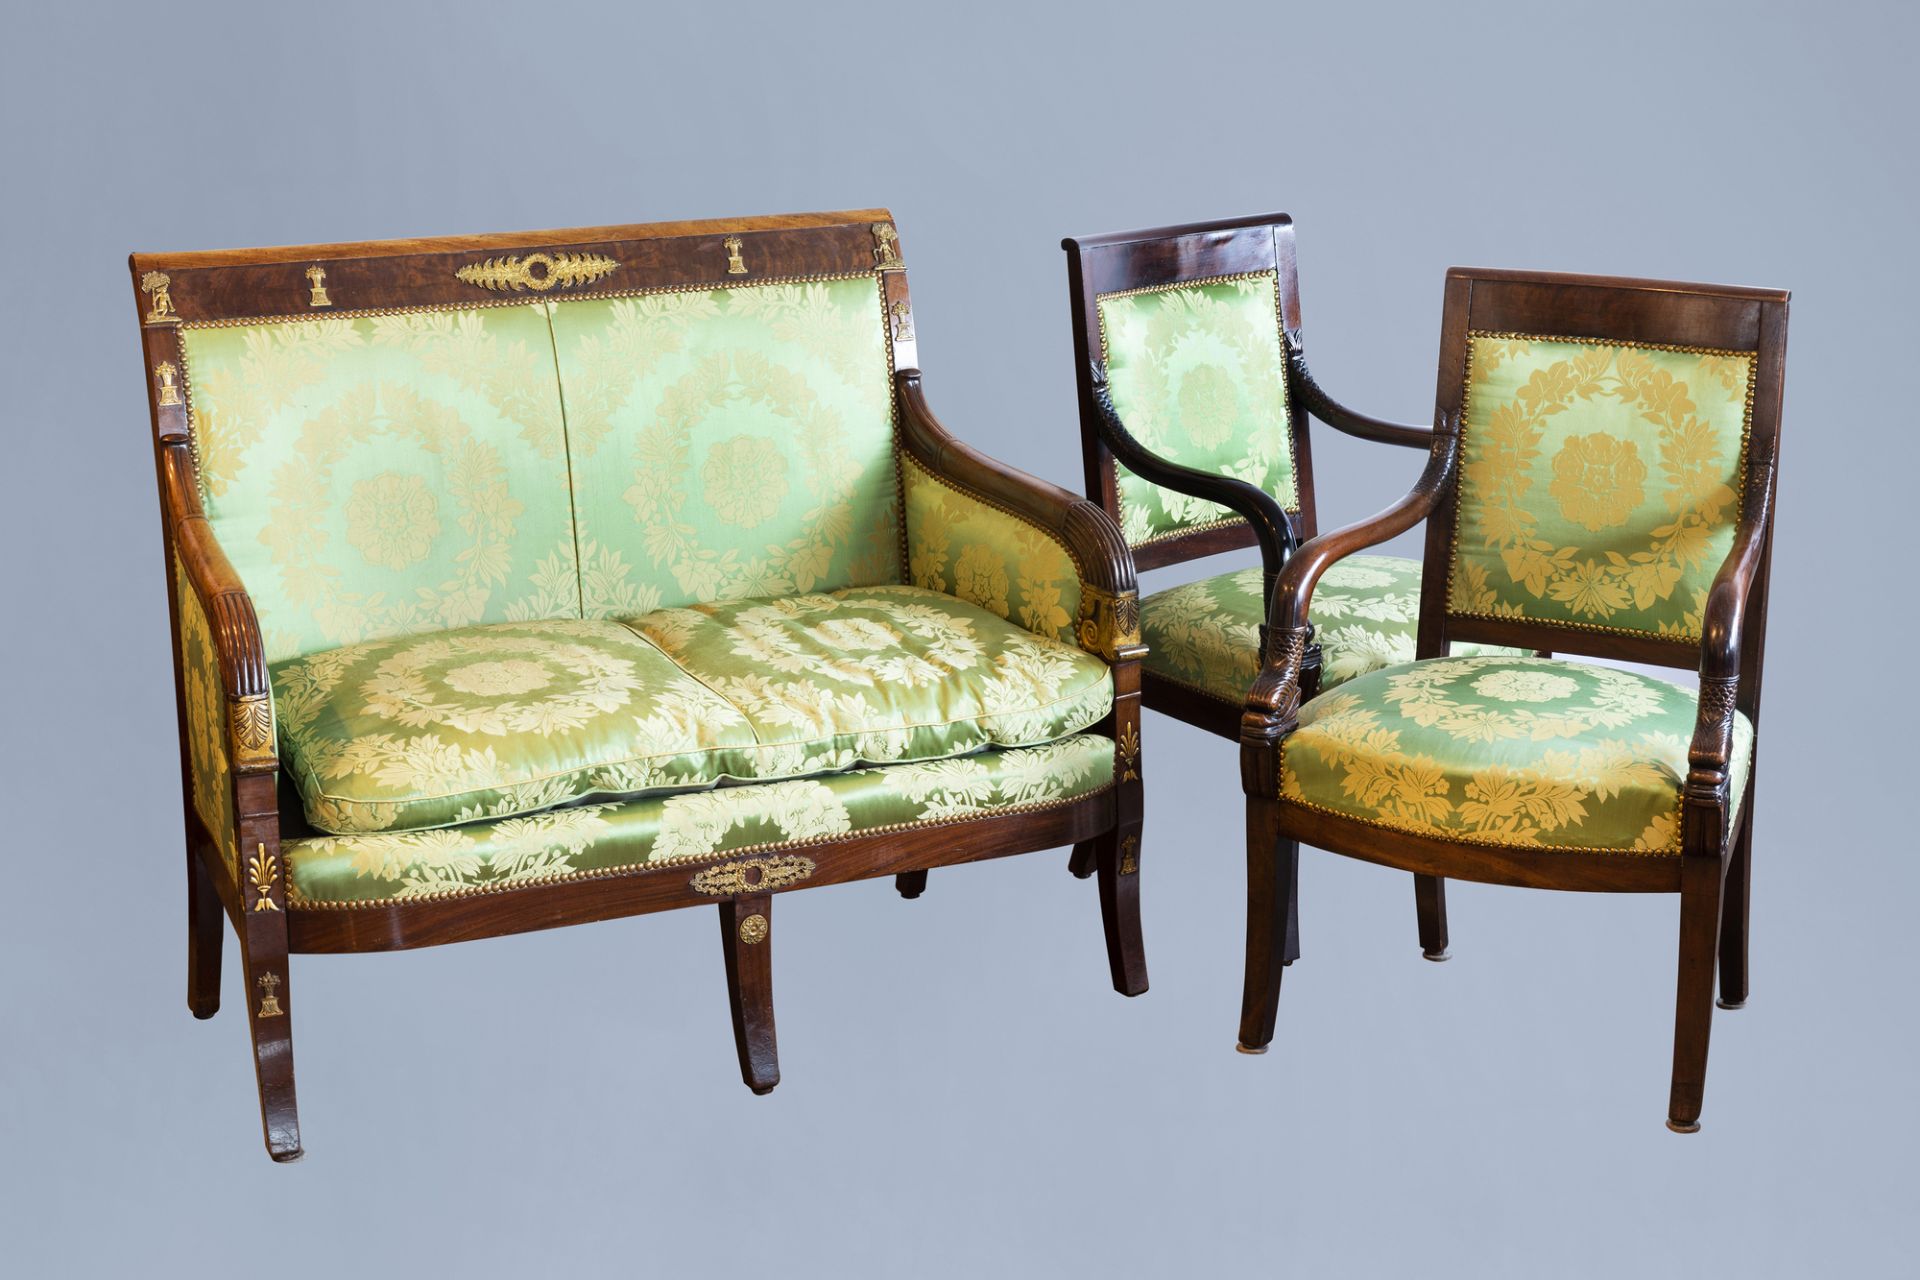 A French gilt bronze mounted mahogany and upholstered Restauration style three-piece salon set, 19th